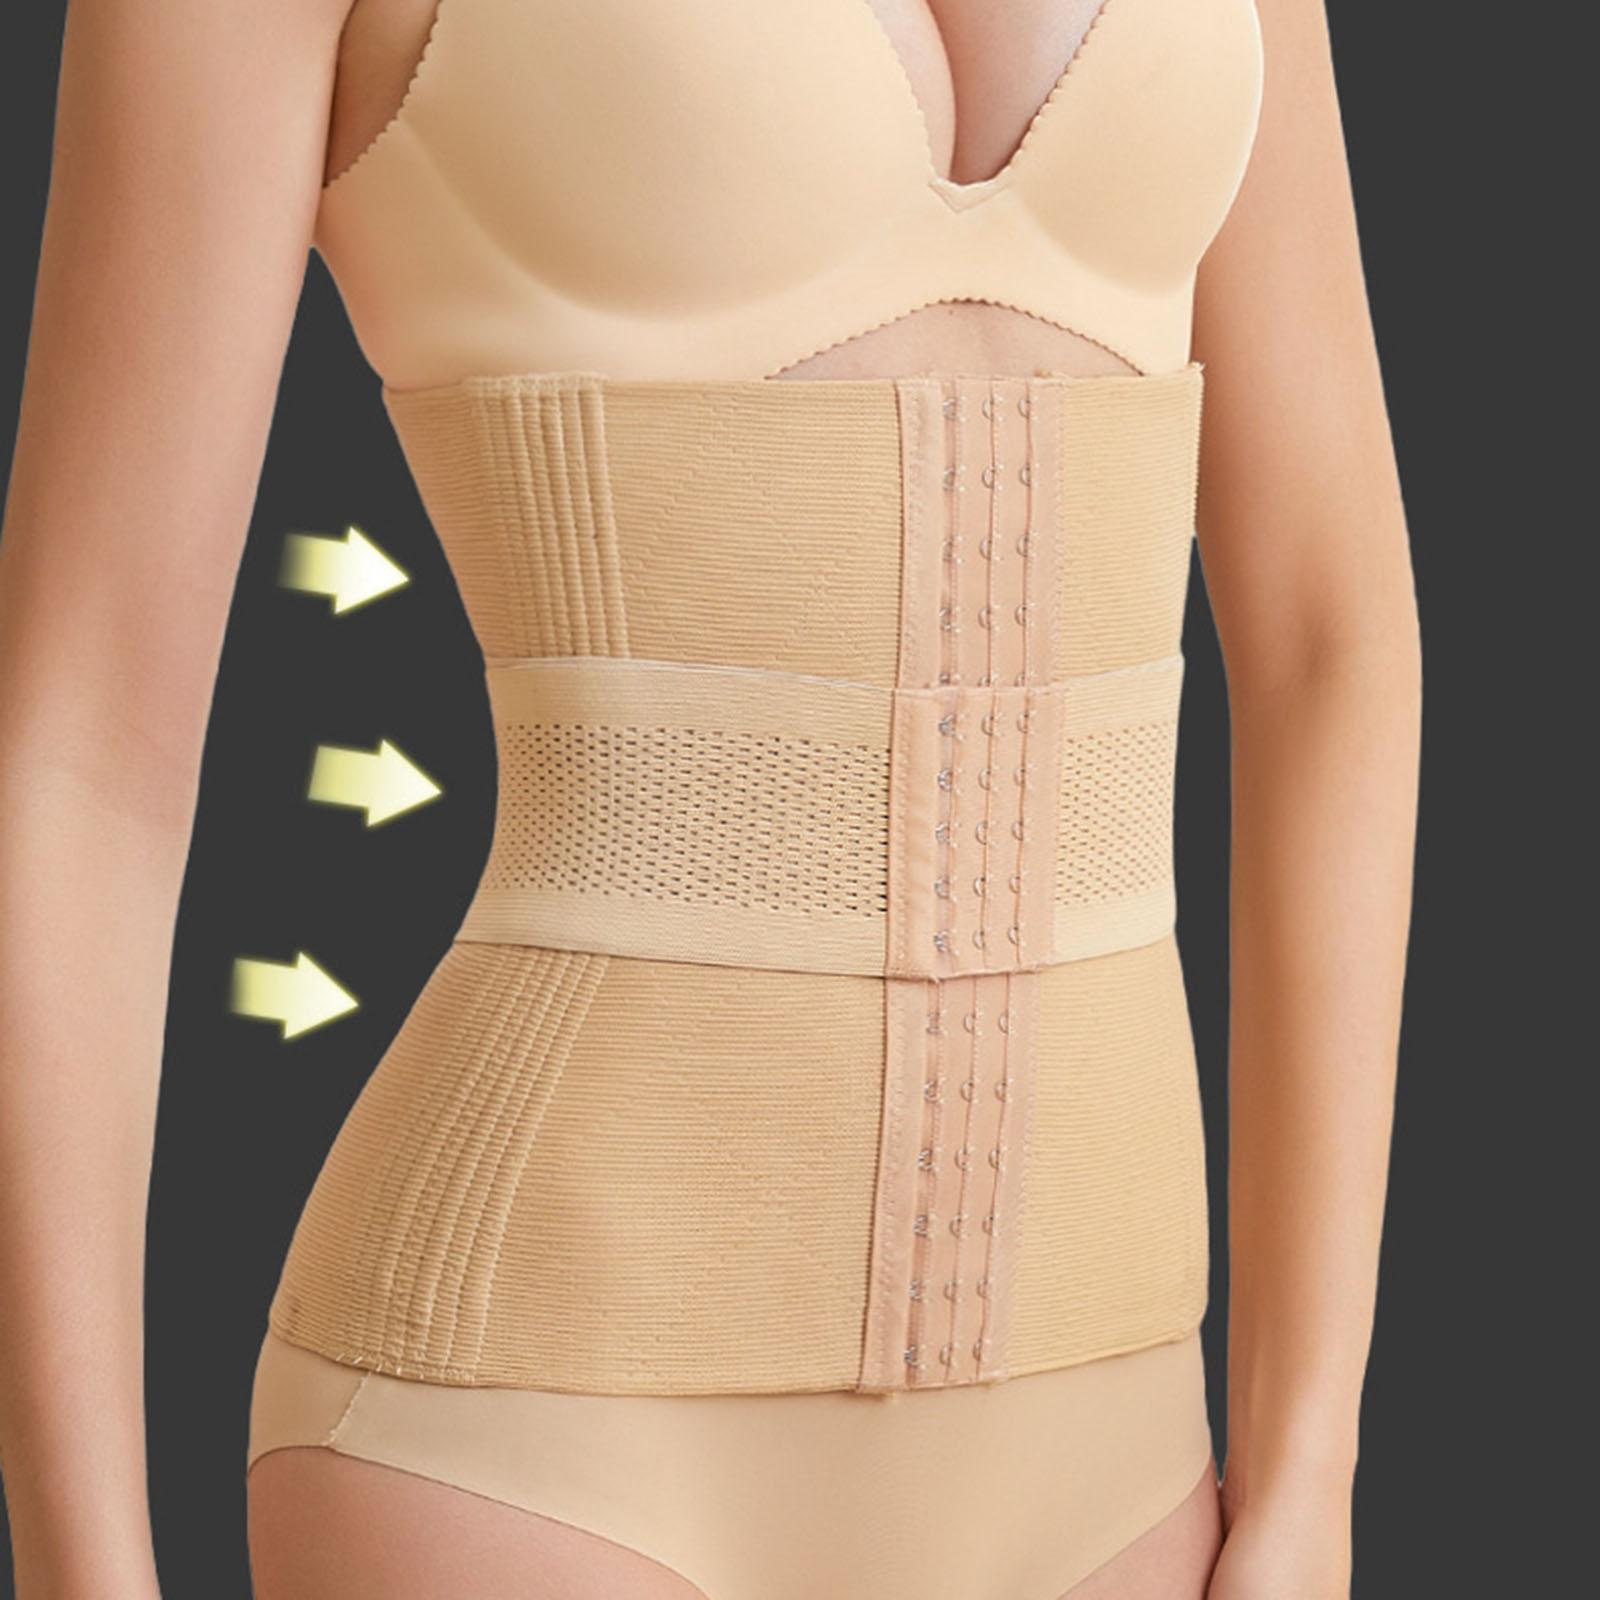 Waist Trainer for Women, Corset Cincher Body Shaper Girdle Trimmer with 3 Hooks Closure